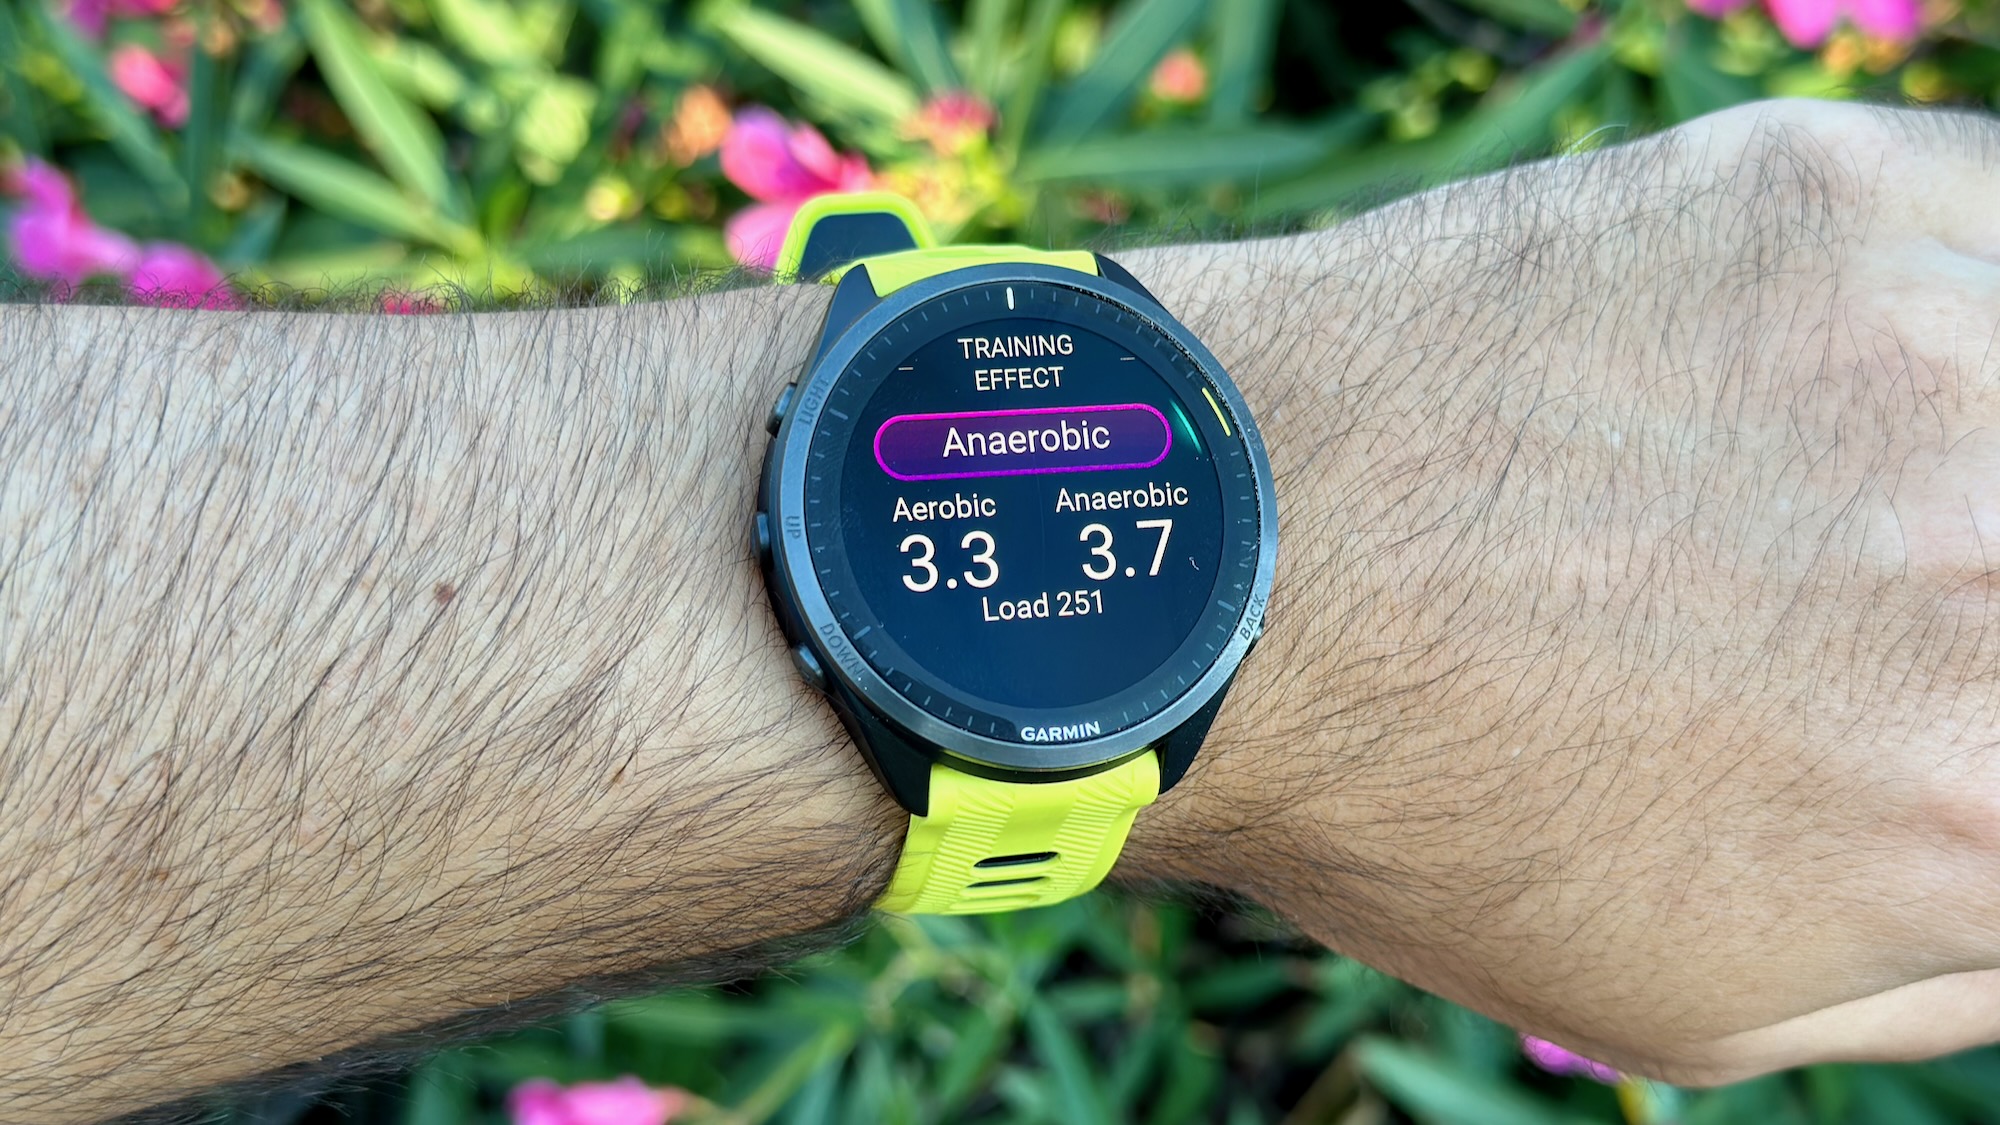 A post-run screen showing aerobic and anaerobic training effect on the Garmin Forerunner 965